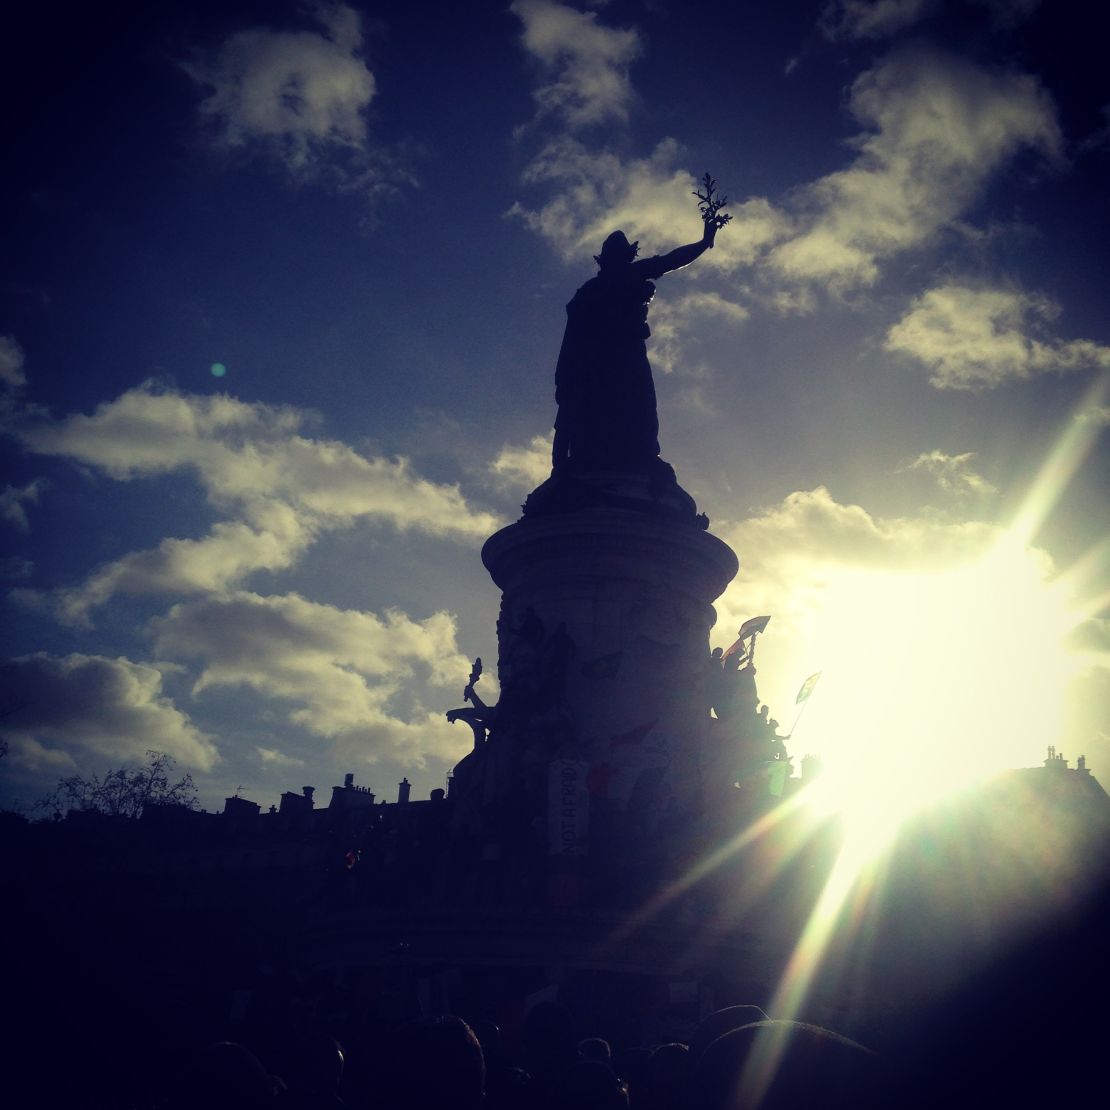 Sun breaks through the clouds over the Paris unity march.